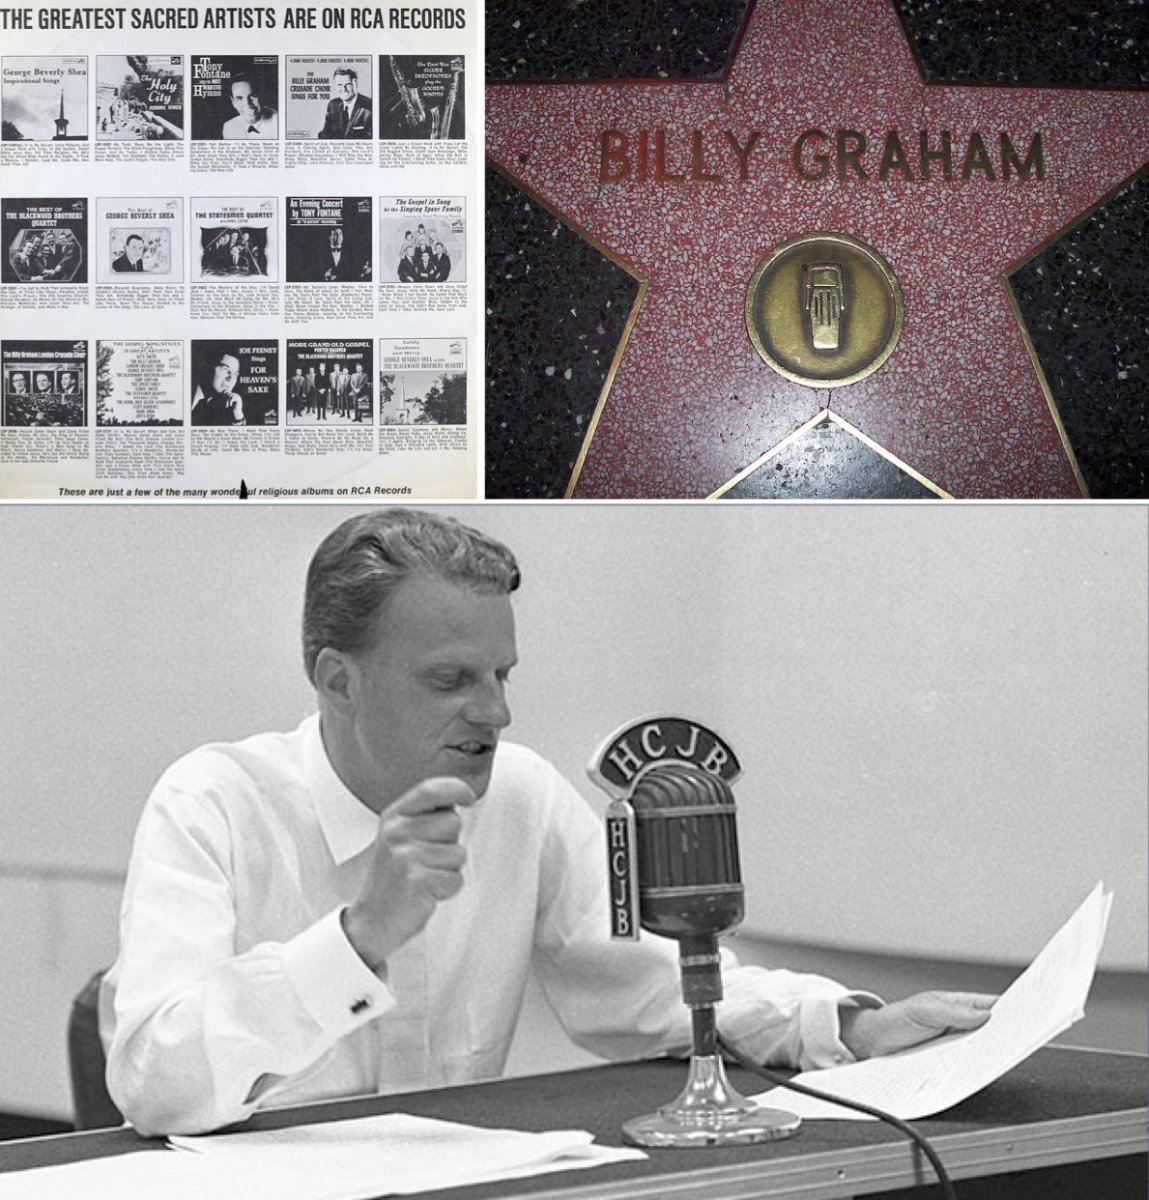 On the left, an advertisement for sacred artists on RCA records. On the right, a star for Graham on the Hollywood Walk of Fame. On the bottom, Graham recording a 1962 episode of The Hour of Decision.